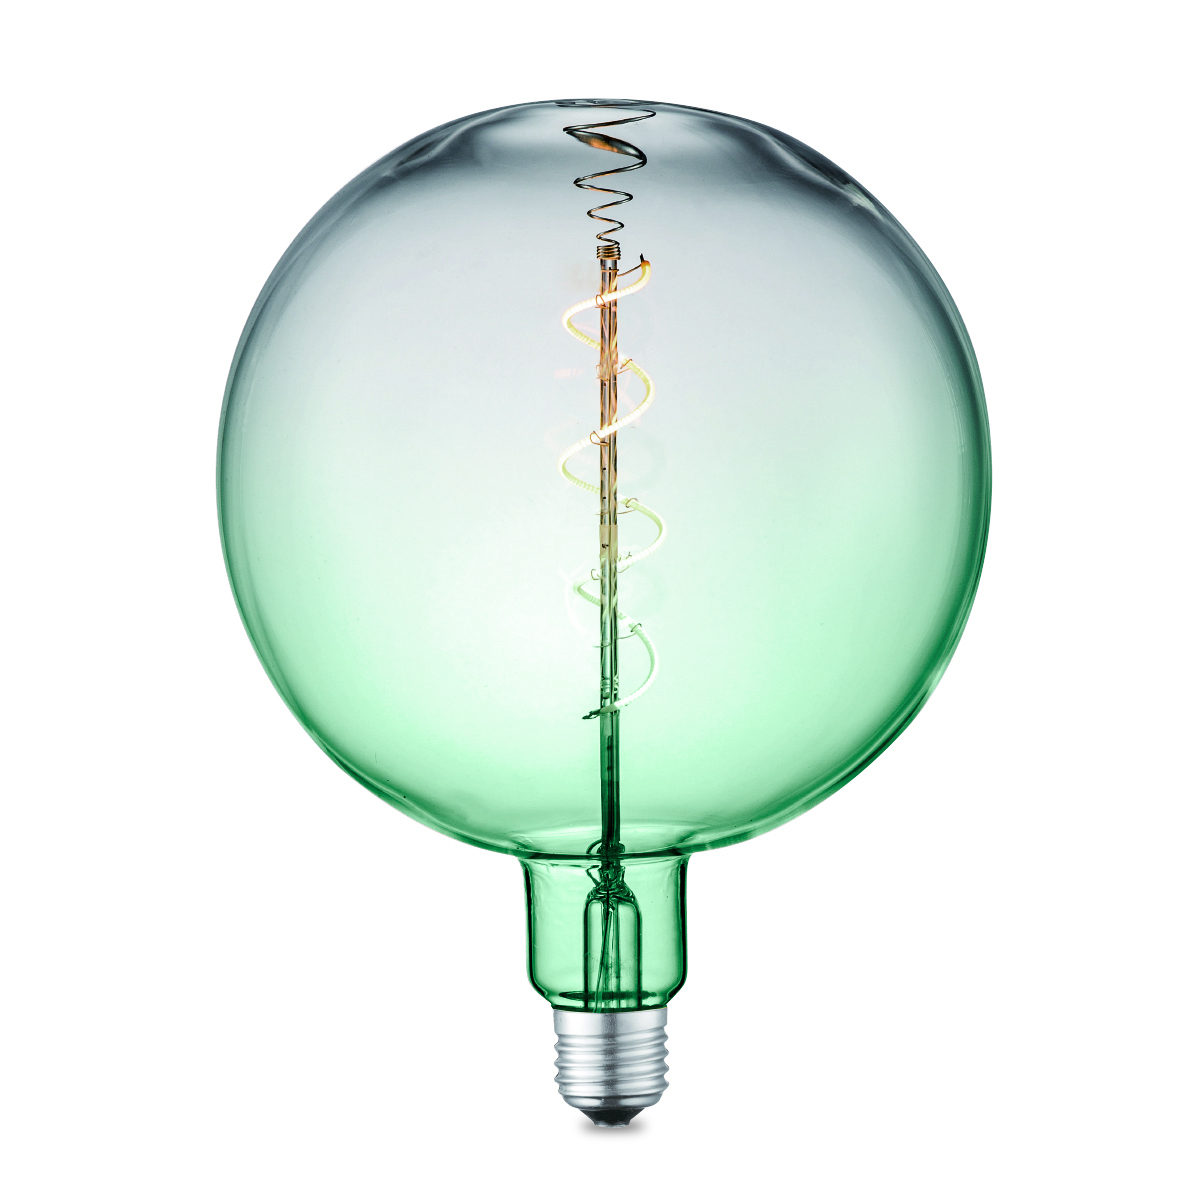 Tangla lighting - TLB-9007-04A - LED Light Bulb Single Spiral filament - G180 4W gradient color bulb - green - non dimmable - E27